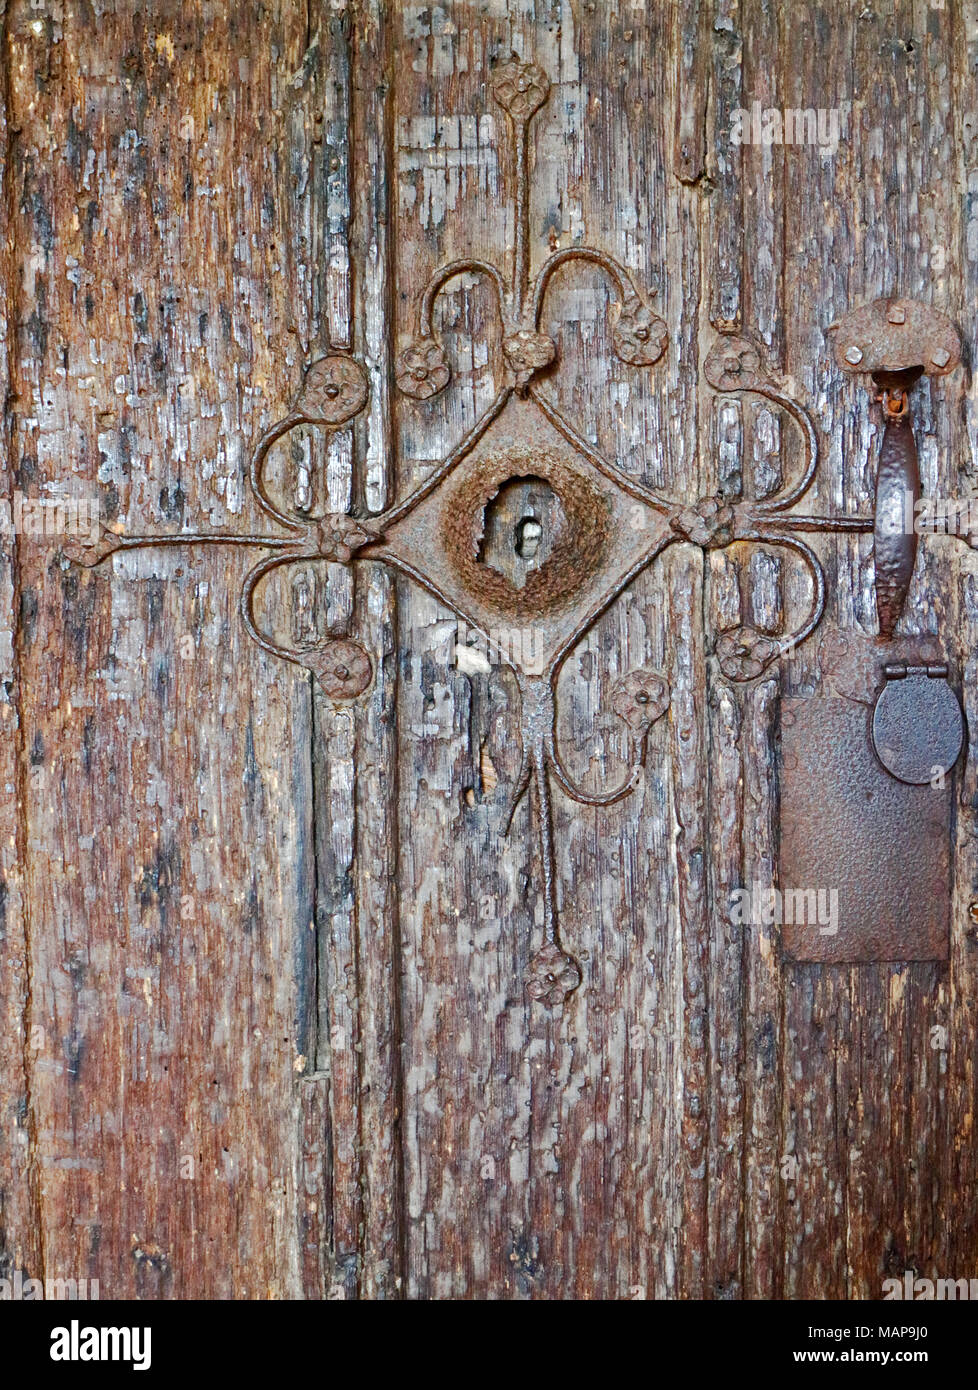 Medieval wooden door with decorative iron plate at the church of St Michael at Irstead, Norfolk, England, United Kingdom, Europe. Stock Photo